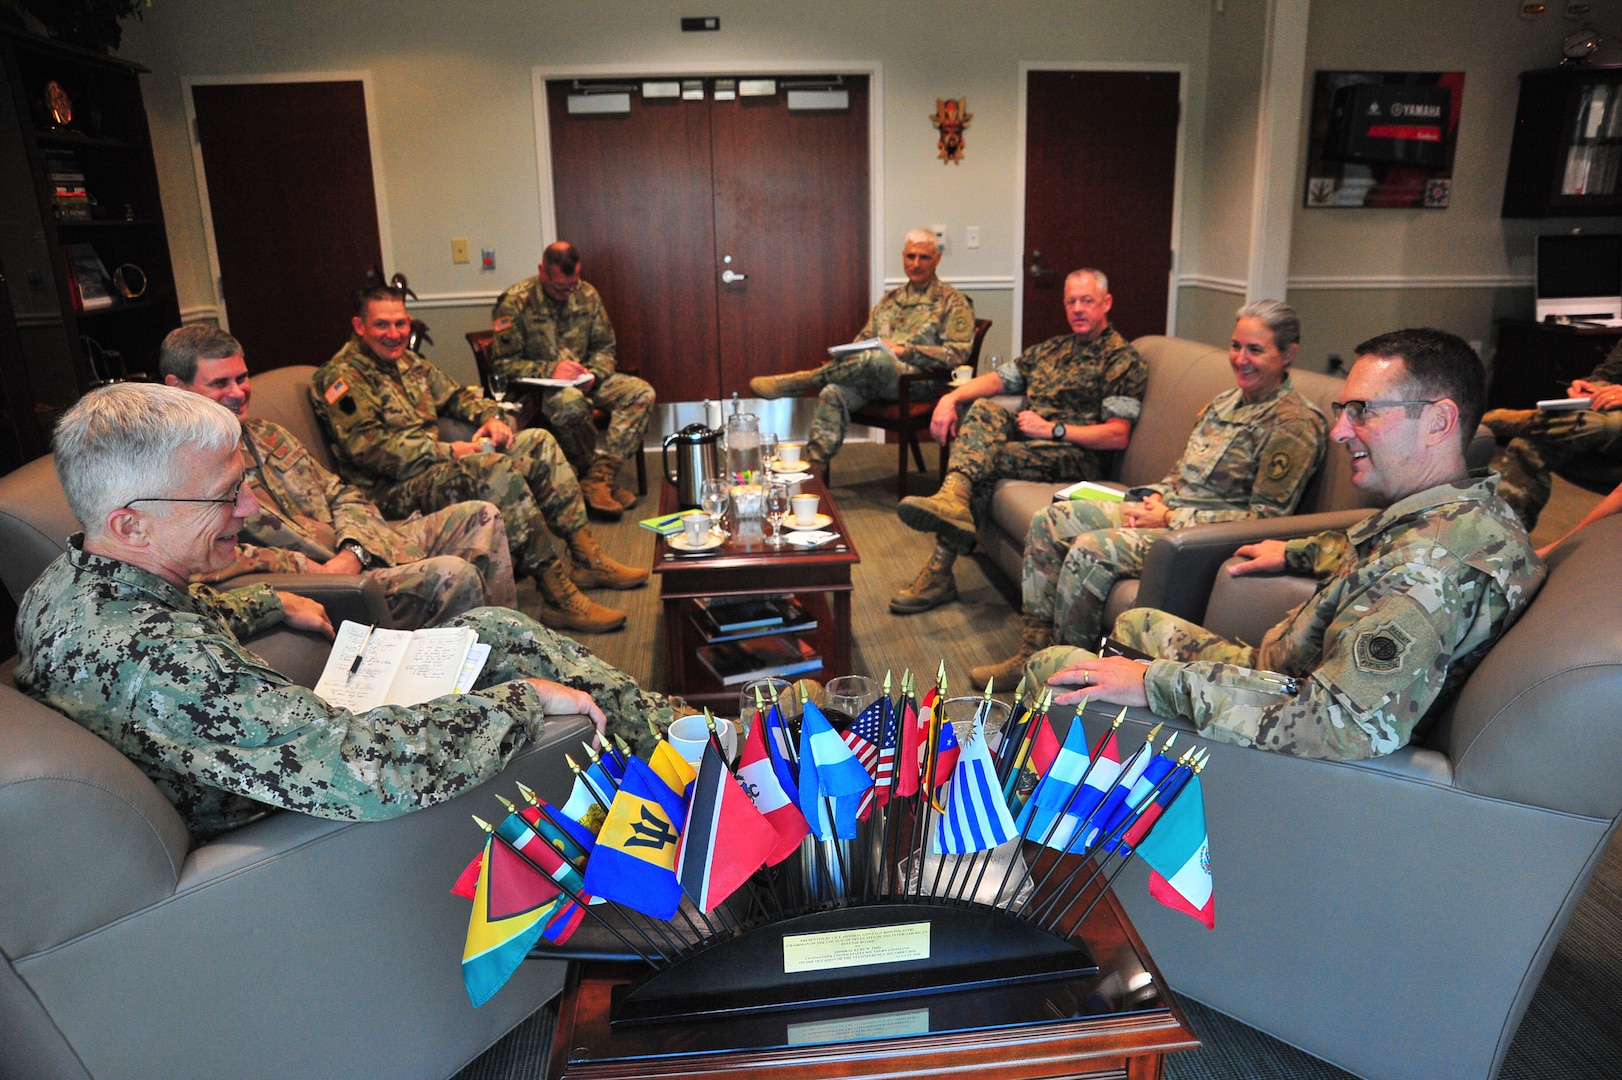 A group of military leaders meet.